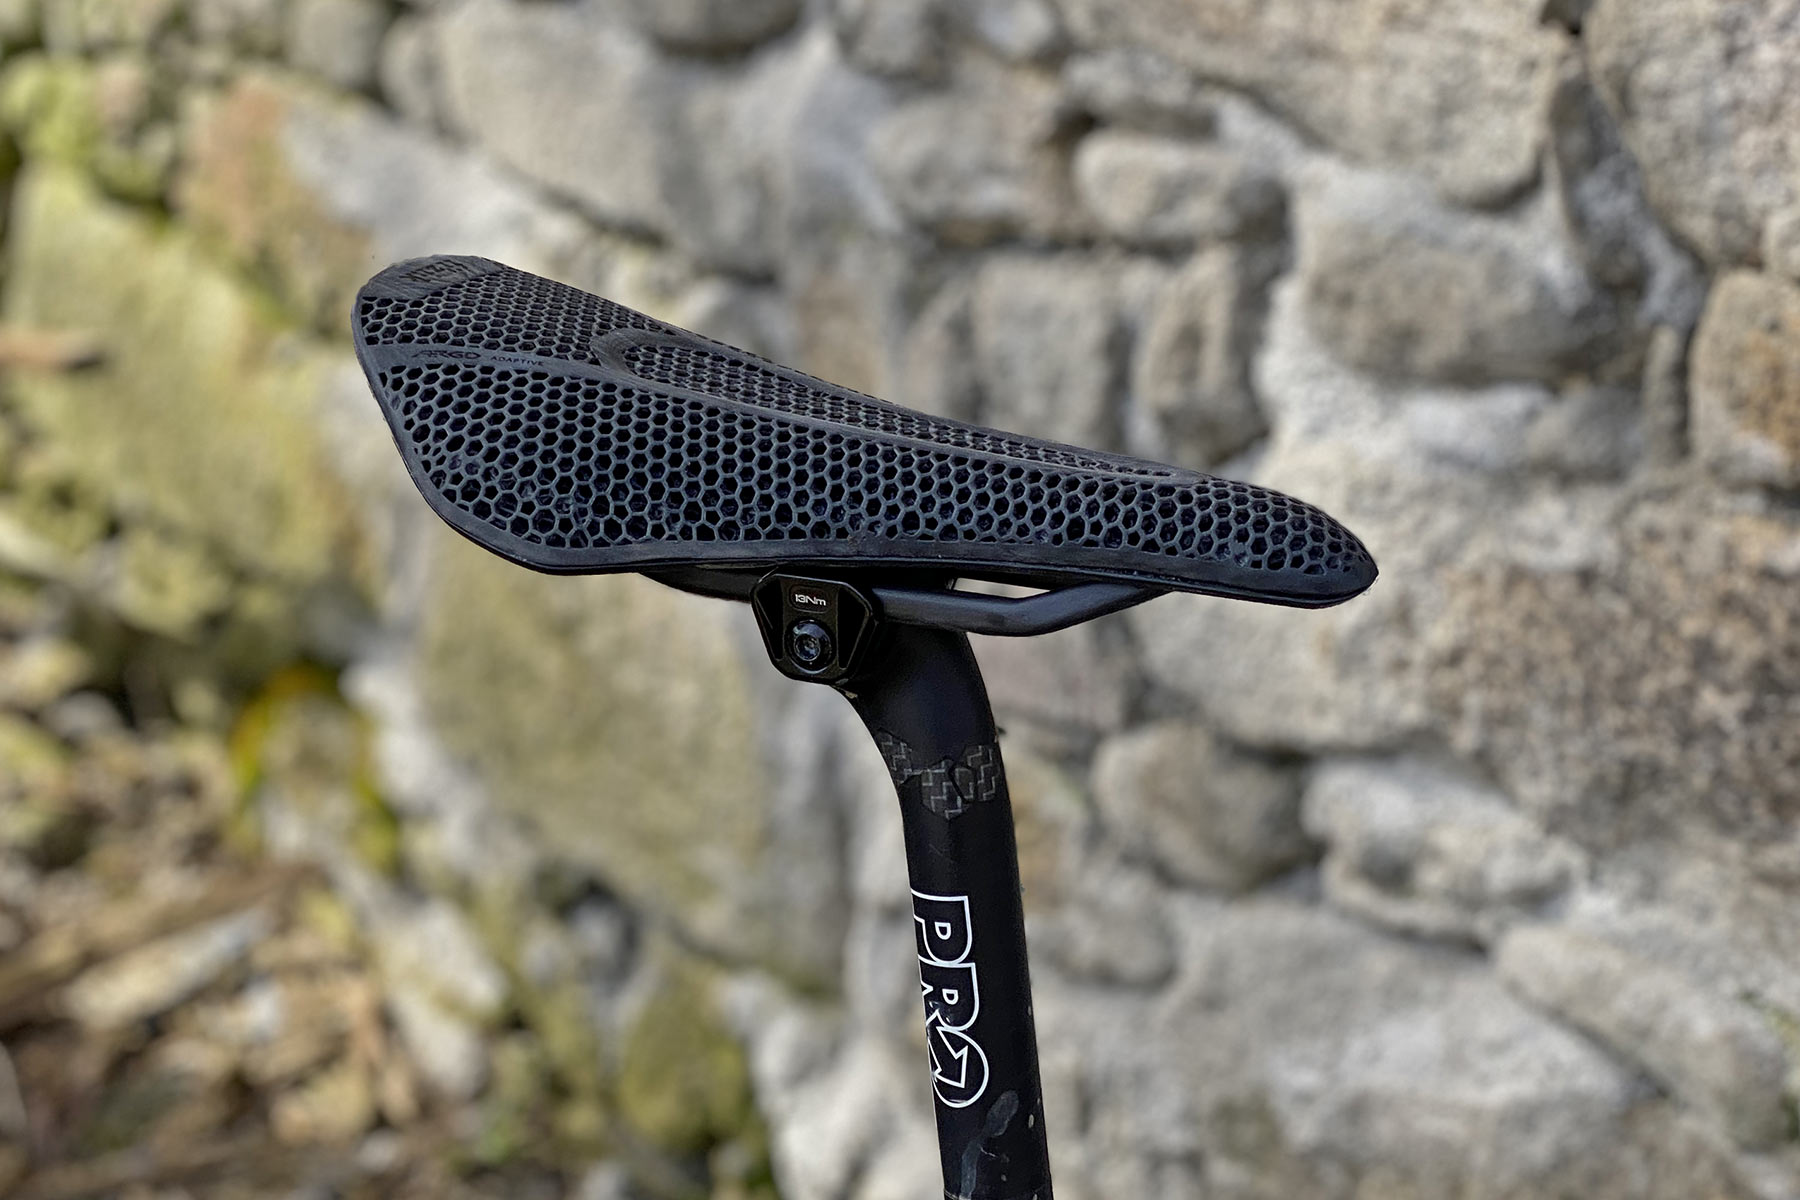 Fizik’s Most Versatile Saddle is 3D-Printed Vento Argo Adaptive 00 with 7x9mm Upgrade